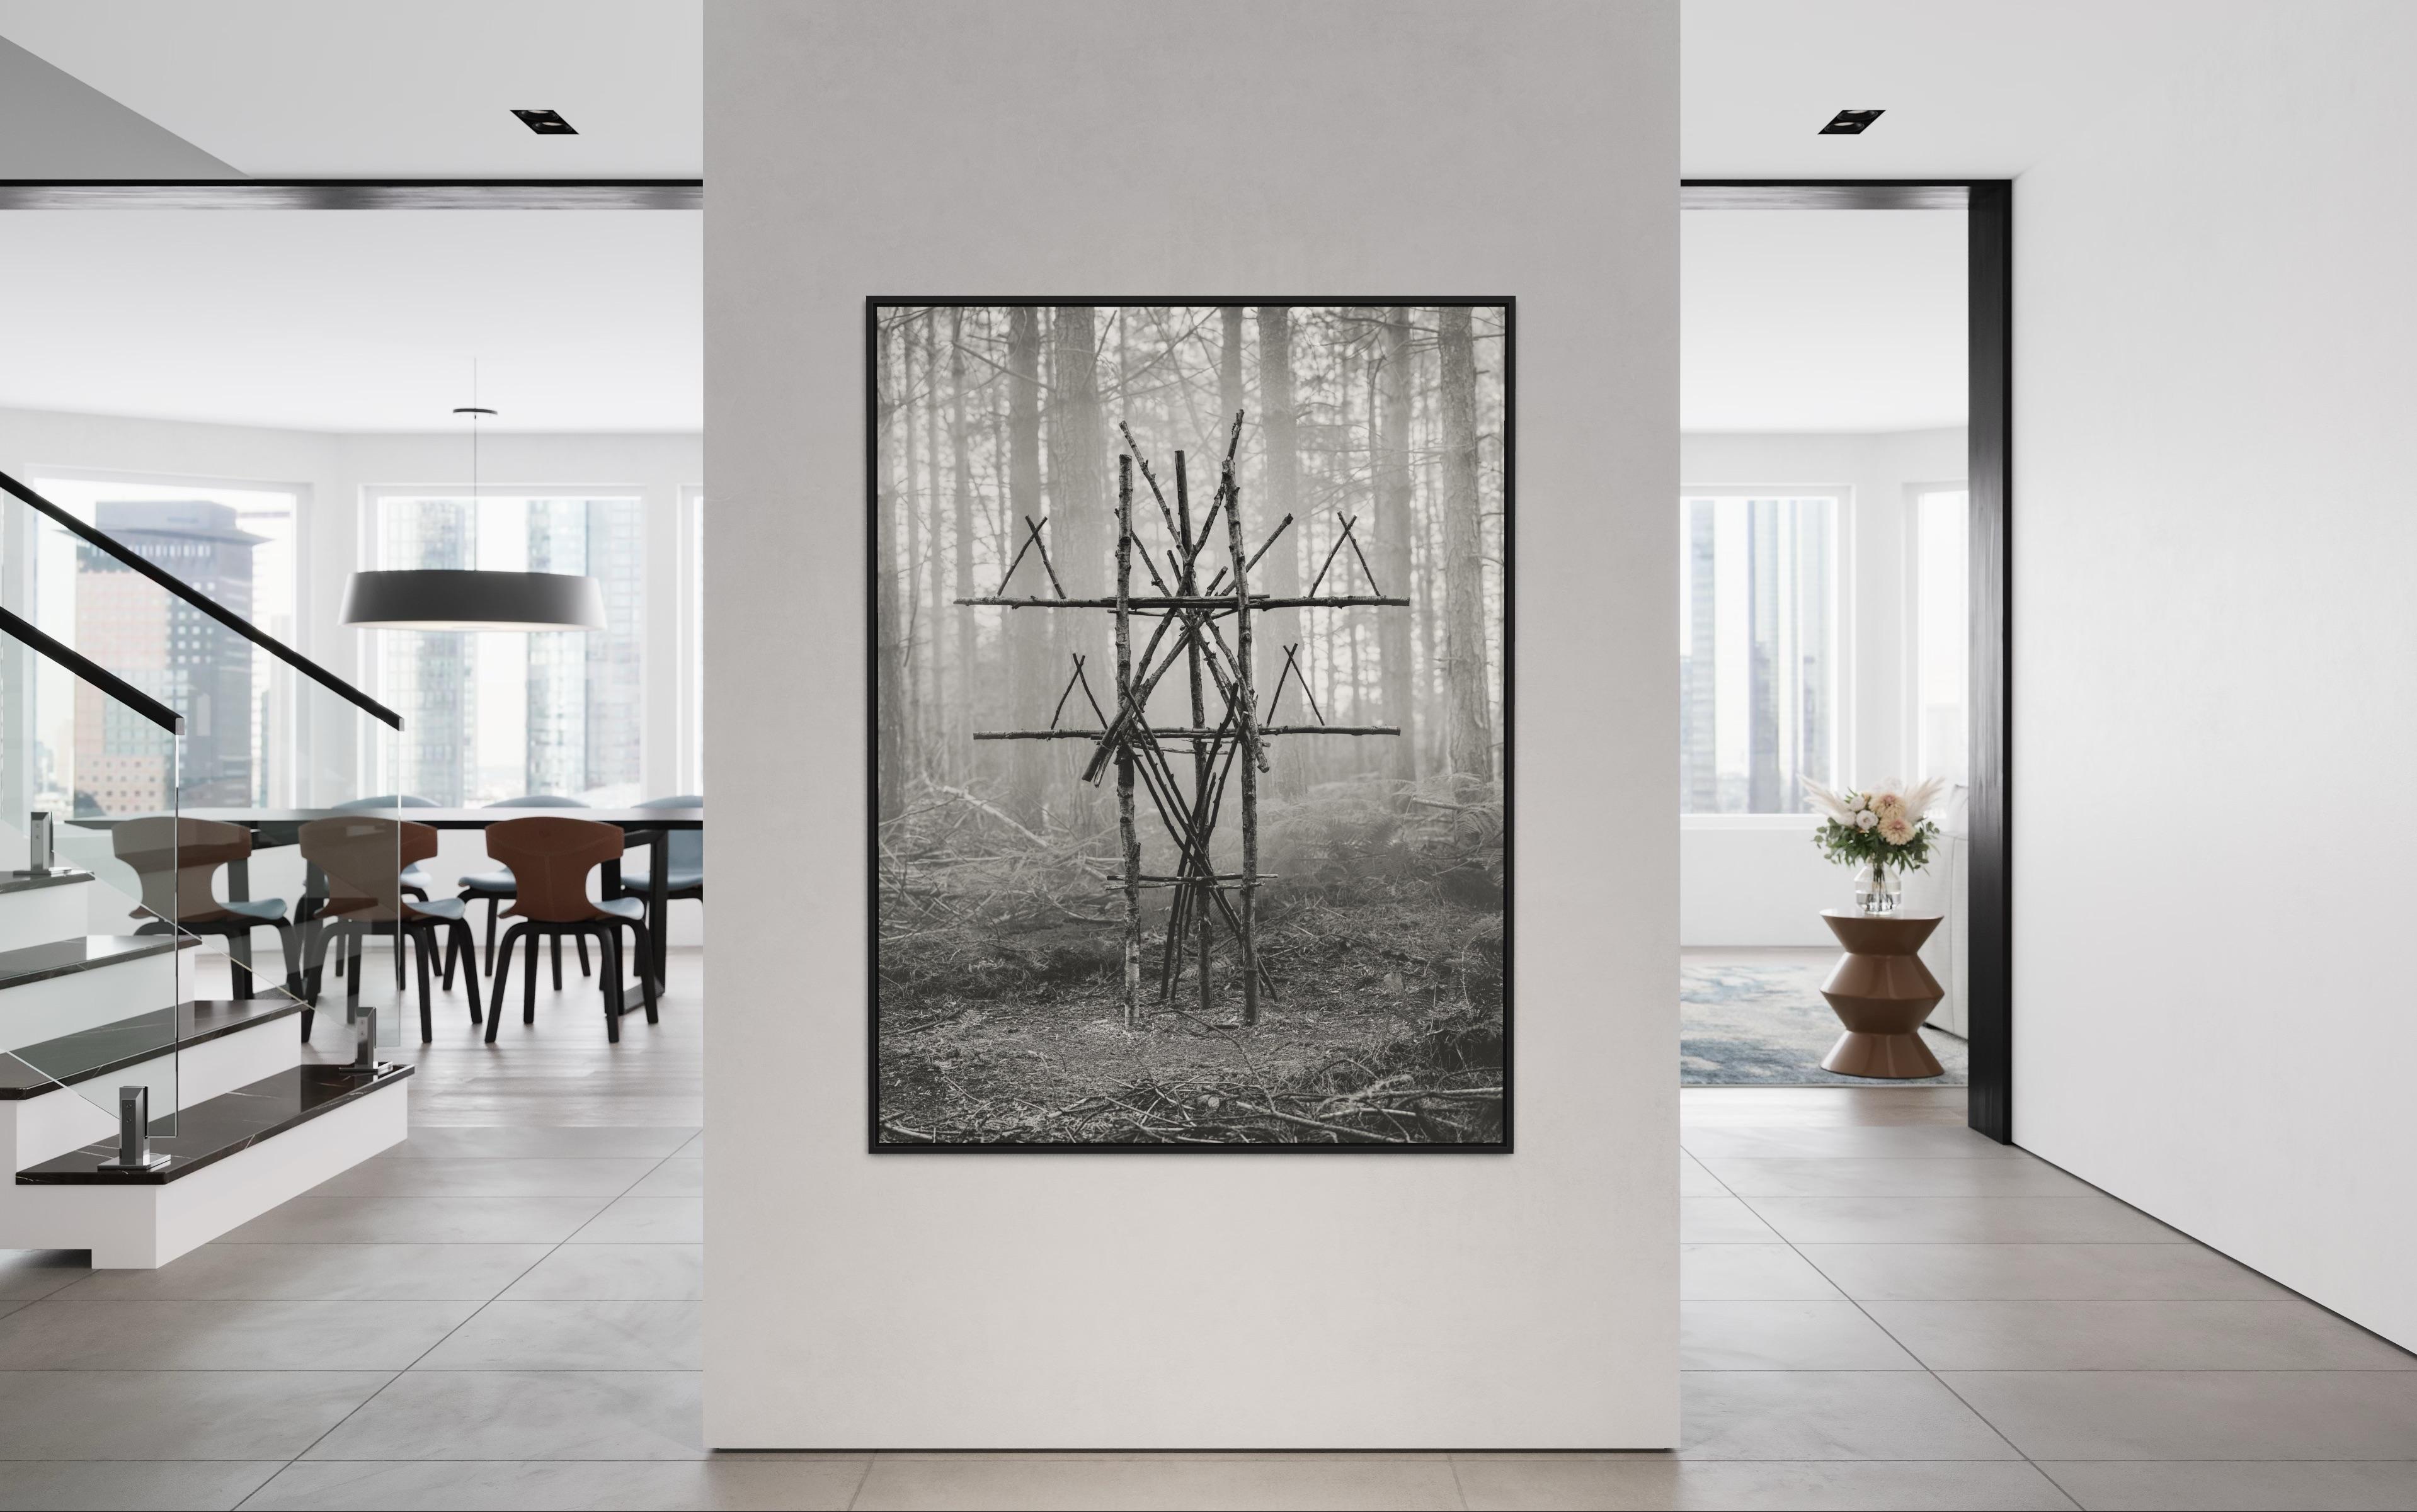 Forest Figure 03 - Black and White - Talismanic Figure, Sculptural Wood, Print - Tribal Photograph by Jasper Goodall